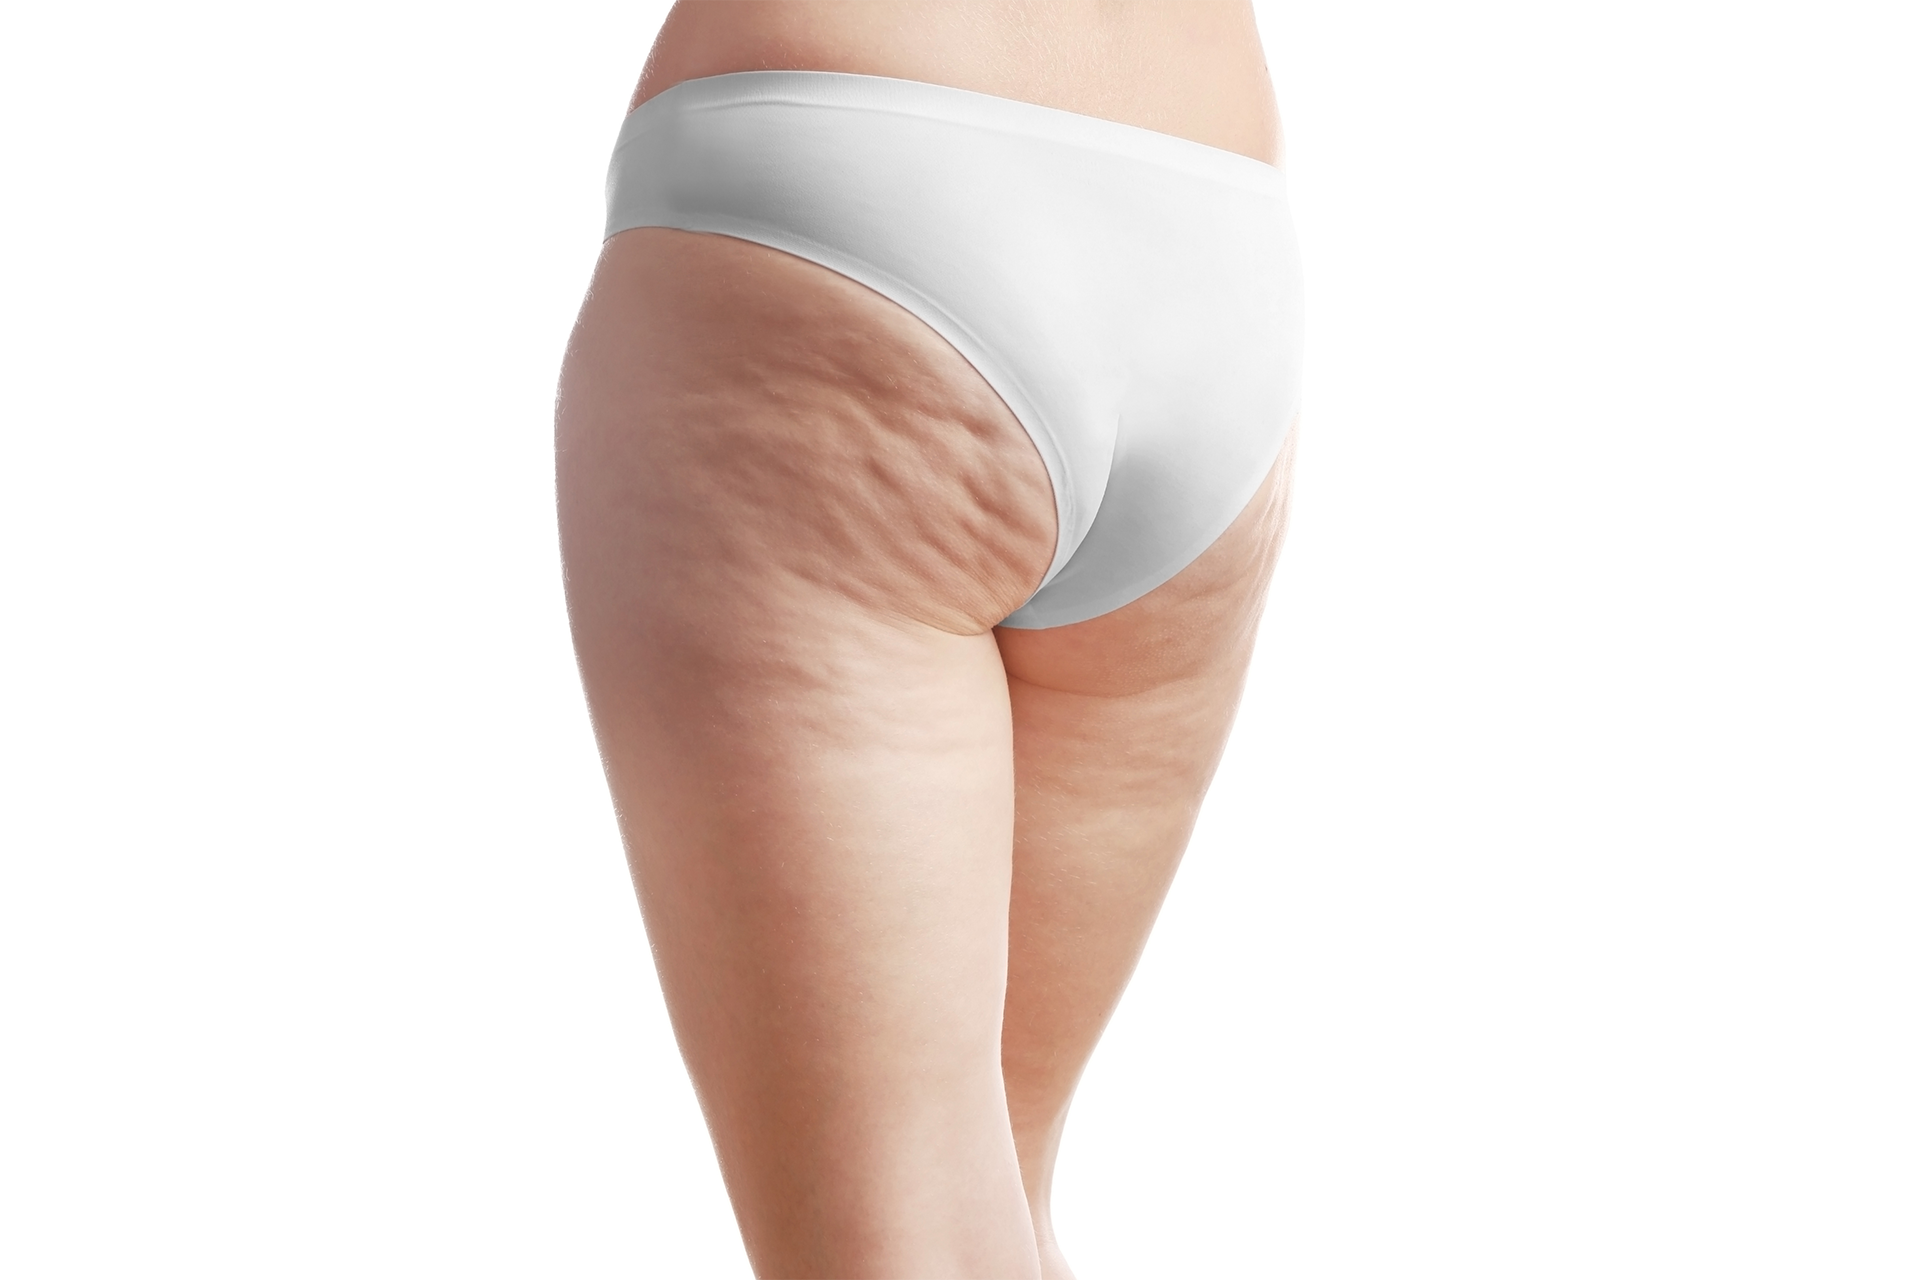 Update on Cellulite Treatment with Qwo